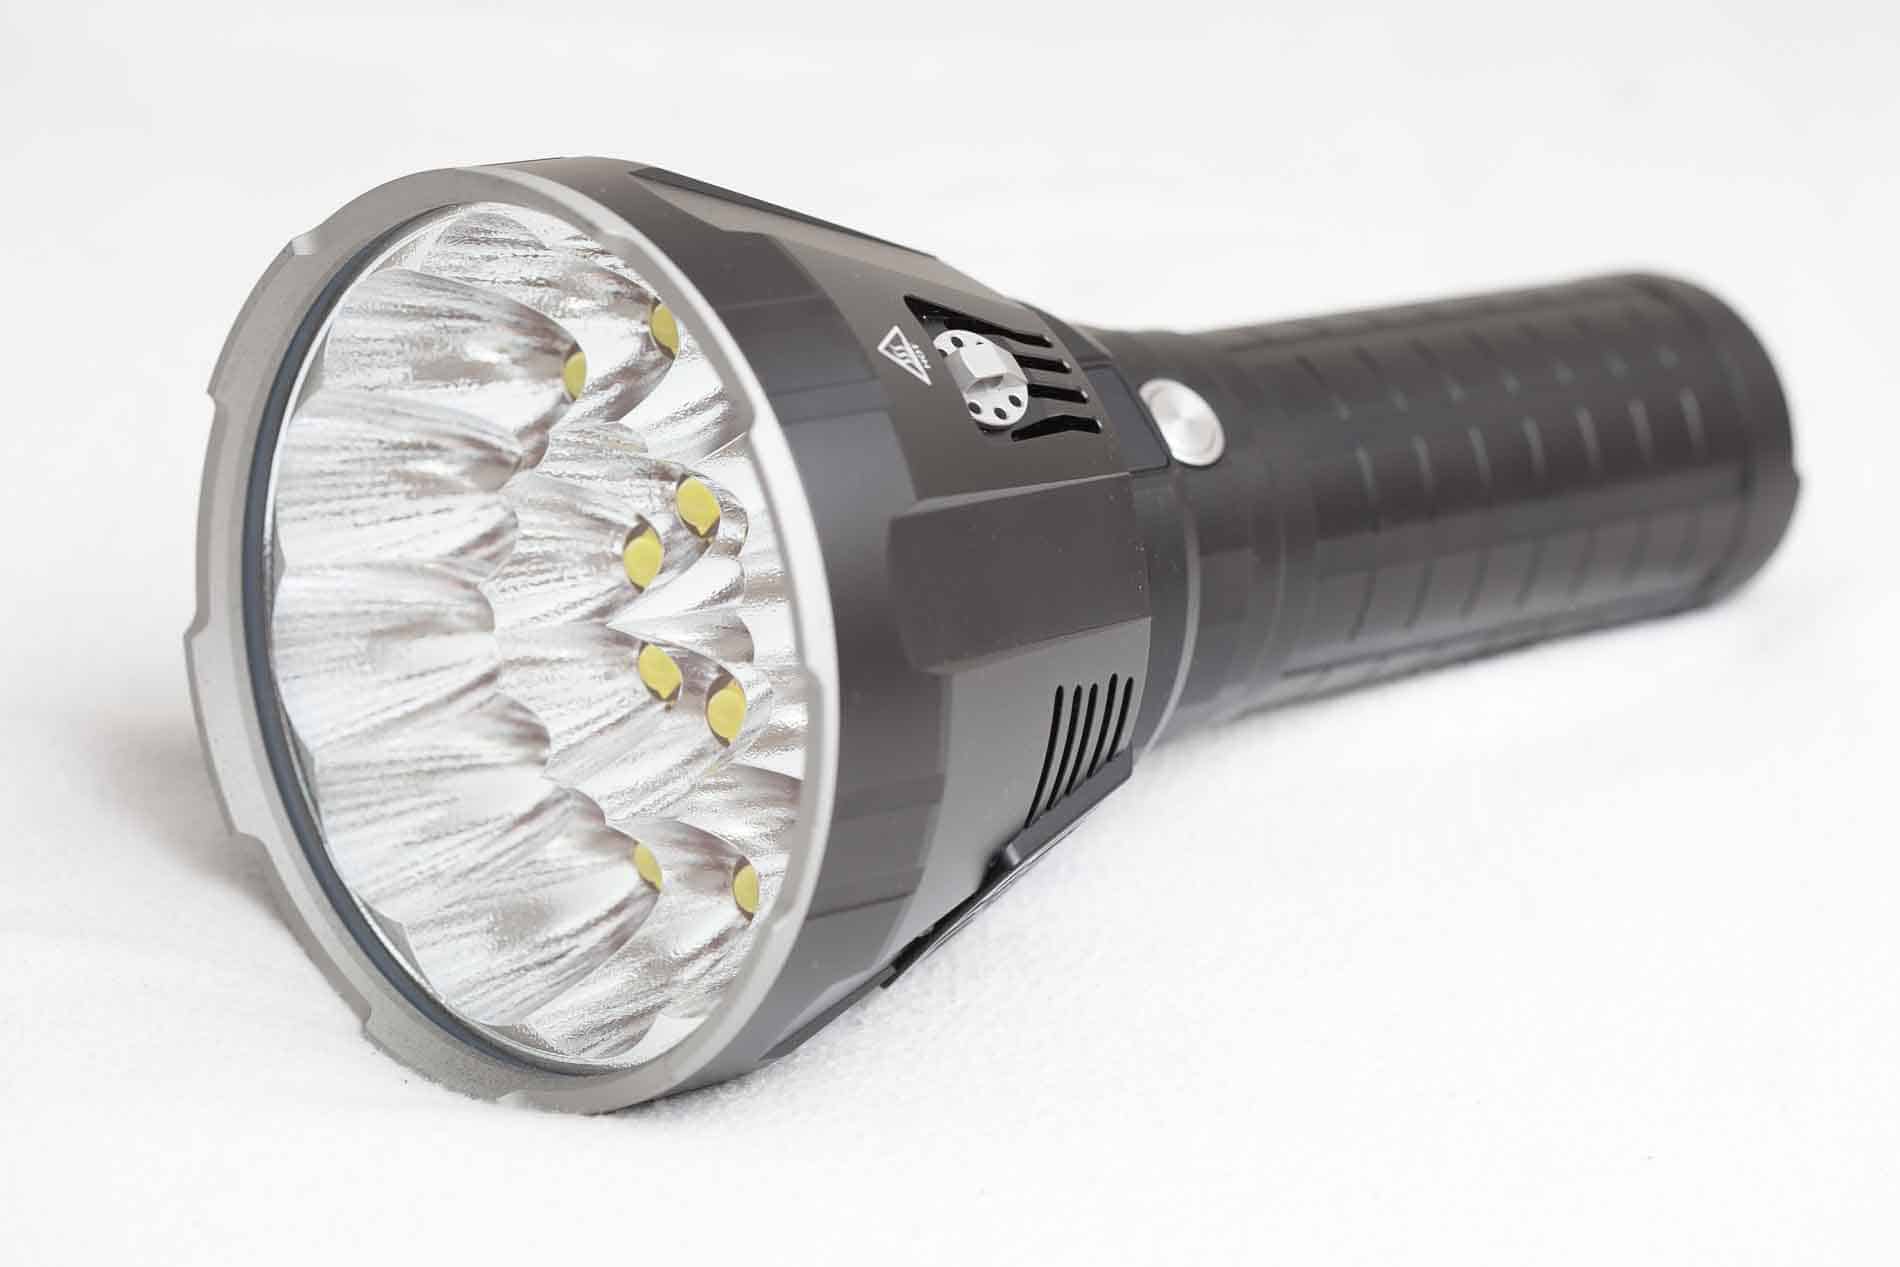 How To Buy A Marauder Mini Powerful Led Flashlight On A Shoestring Budget